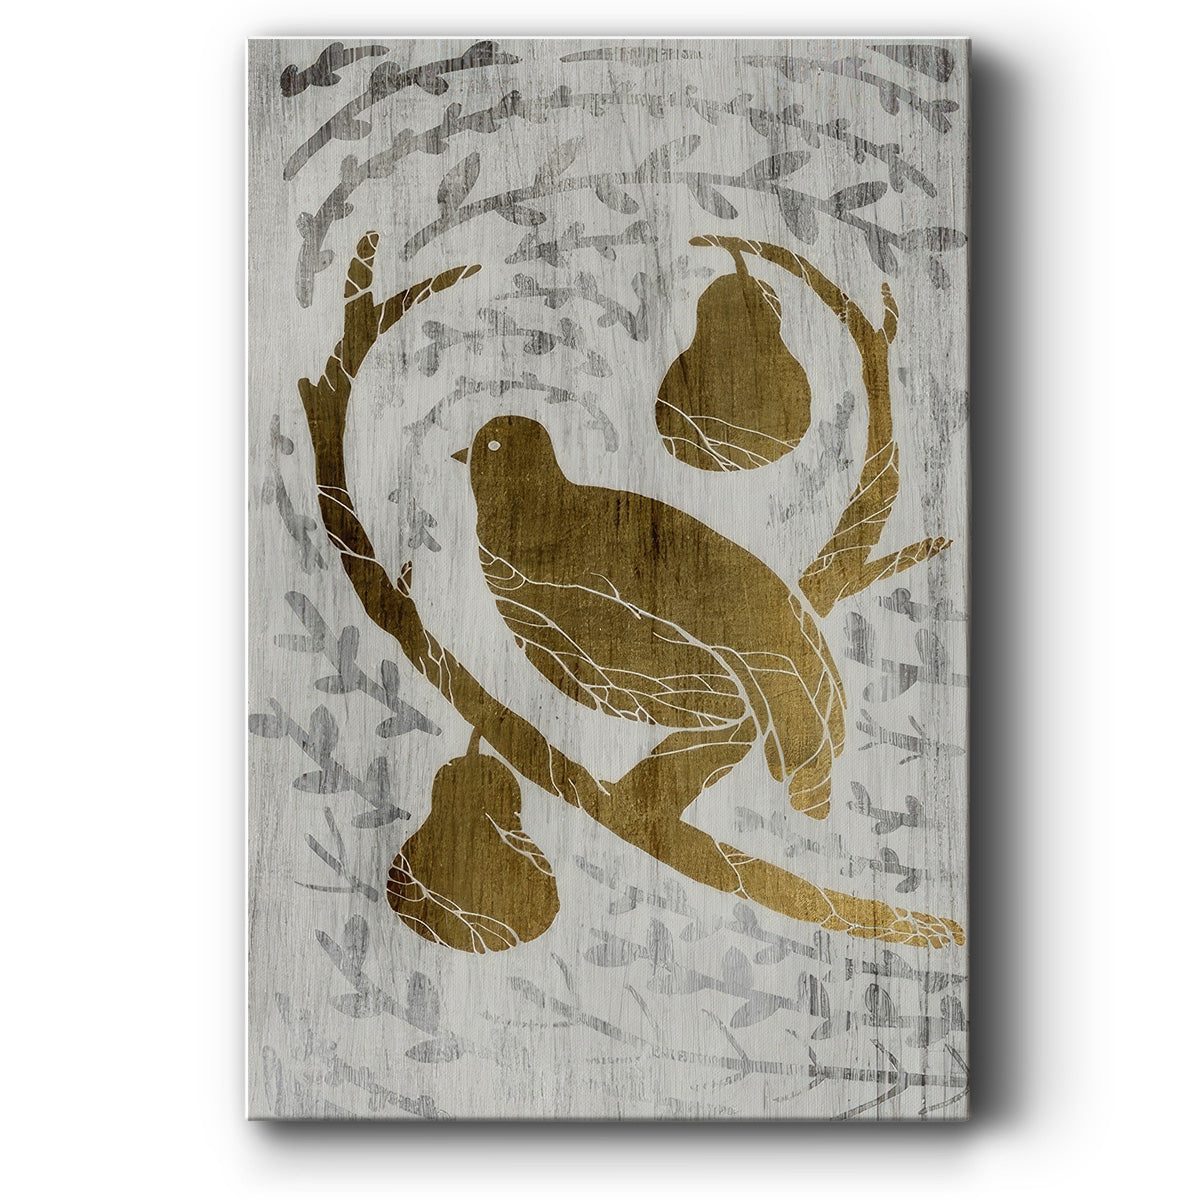 Partridge in a Pear Tree  - Gold Leaf Holiday - Gallery Wrapped Canvas